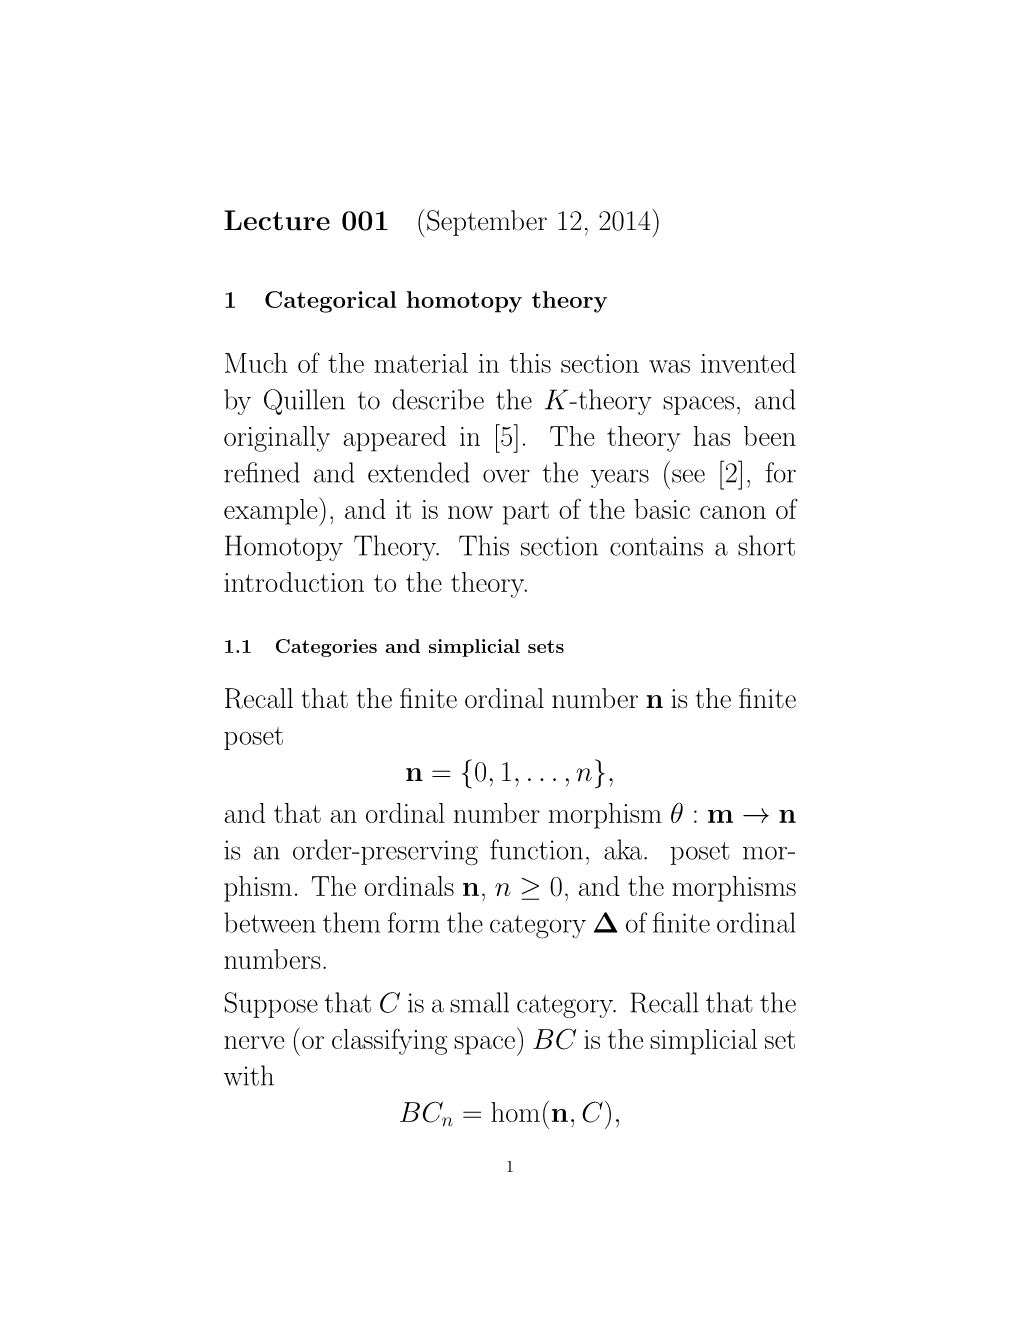 Lecture 001 (September 12, 2014) Much of the Material in This Section Was Invented by Quillen to Describe the K-Theory Spaces, A